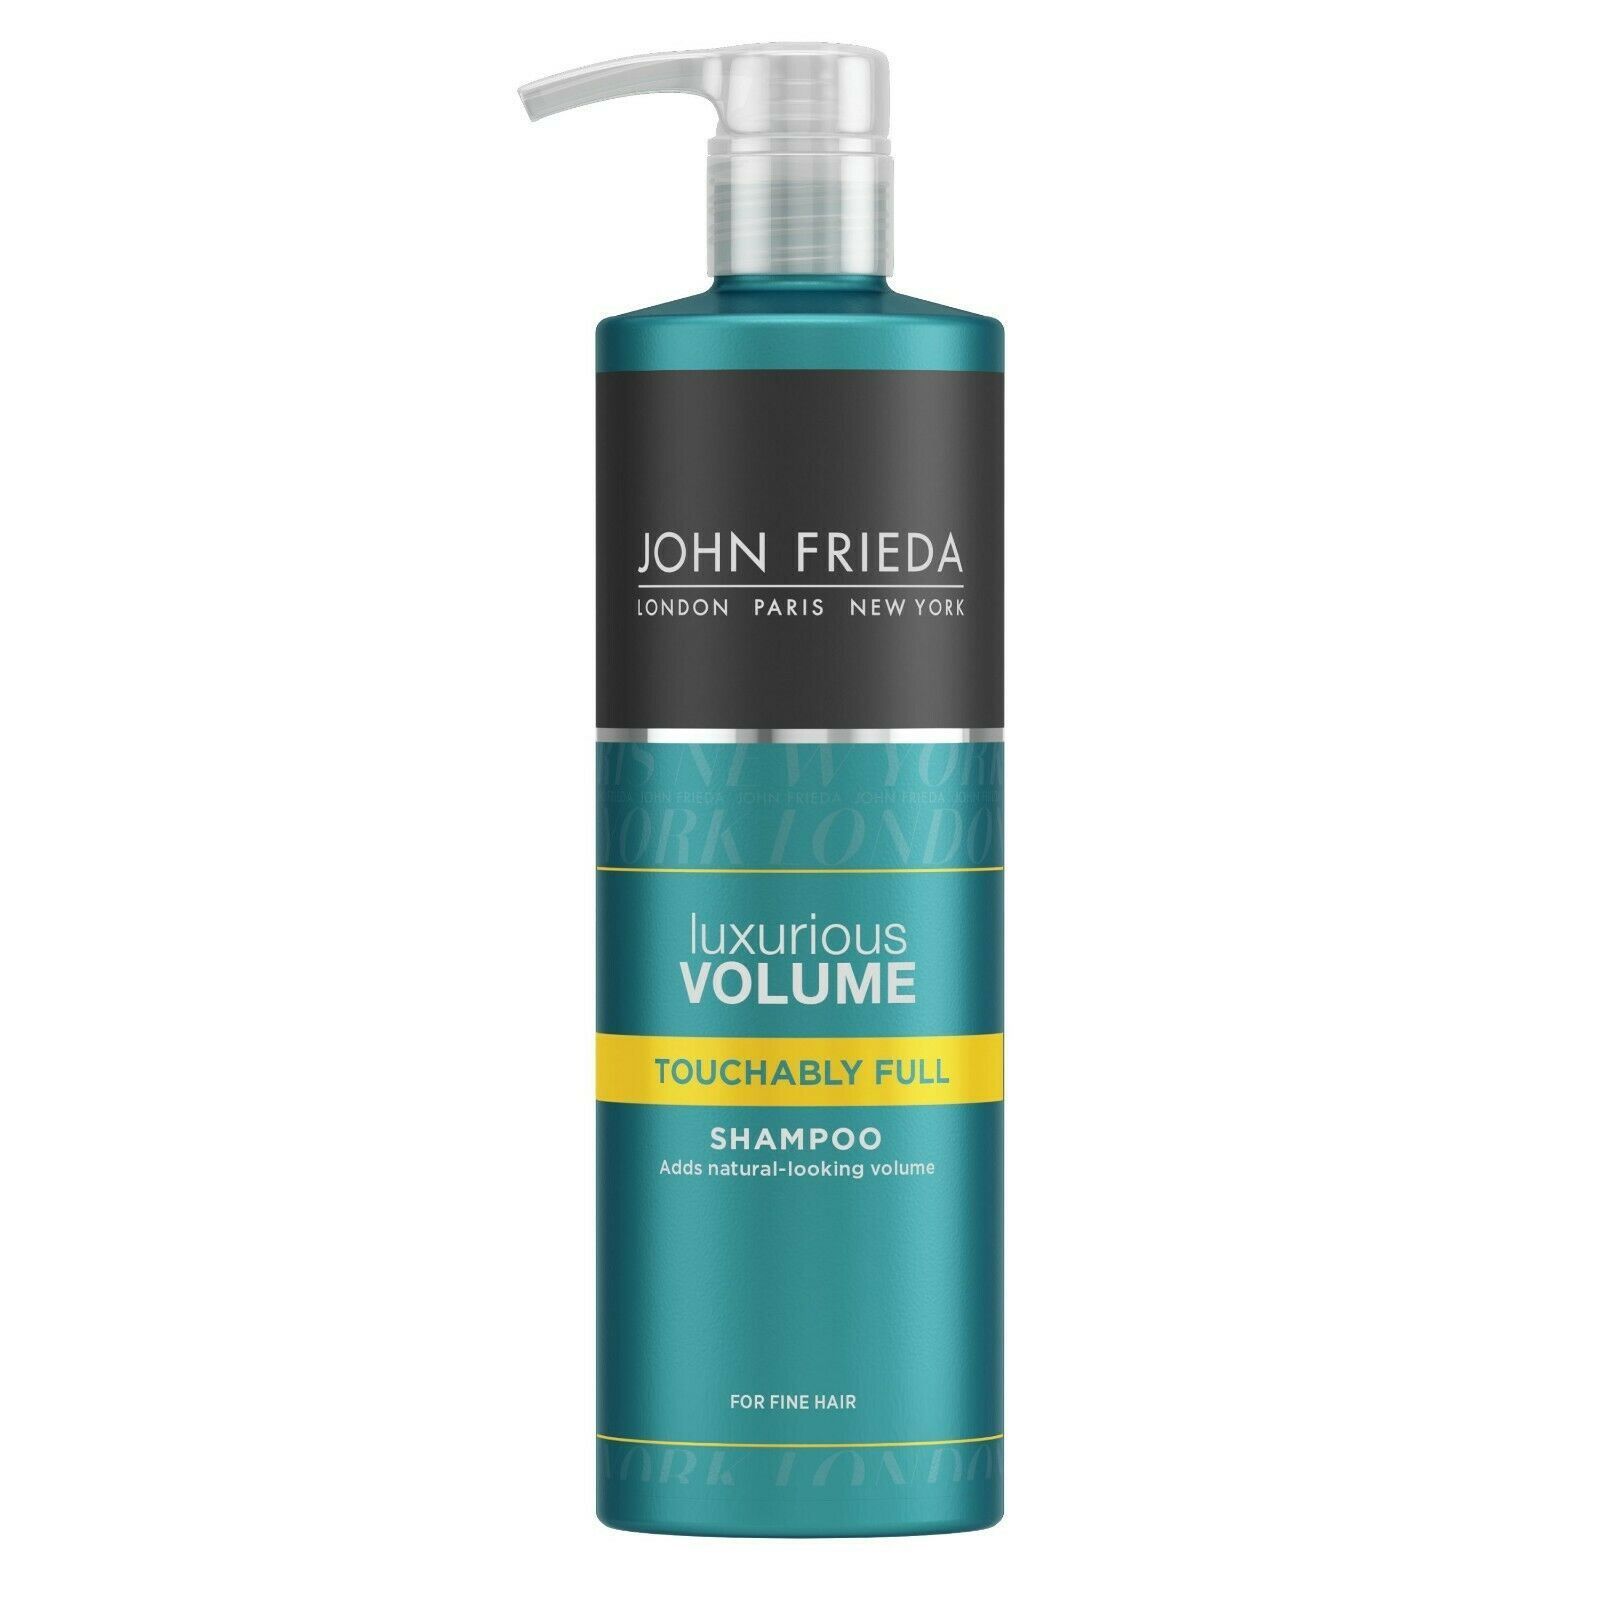 John Frieda Luxurious Volume Touchably Full Hair Shampoo & Conditioner 500ml Duo Pack.  Add natural-looking volume to fine strands. The gentle shampoo, with Caffeine Vitality Complex, cleanses and gives flat strands volume that's touchably soft. Then detangle and nourish hair without weighing it down with the lightweight conditioner which preps volume without tangles. Safe for colour-treated hair. 

Set Contains:  1x John Frieda Luxurious Volume Touchably Full Hair Shampoo 500ml & 1x John Frieda Luxurious Volume Touchably Full Hair Conditioner 500ml